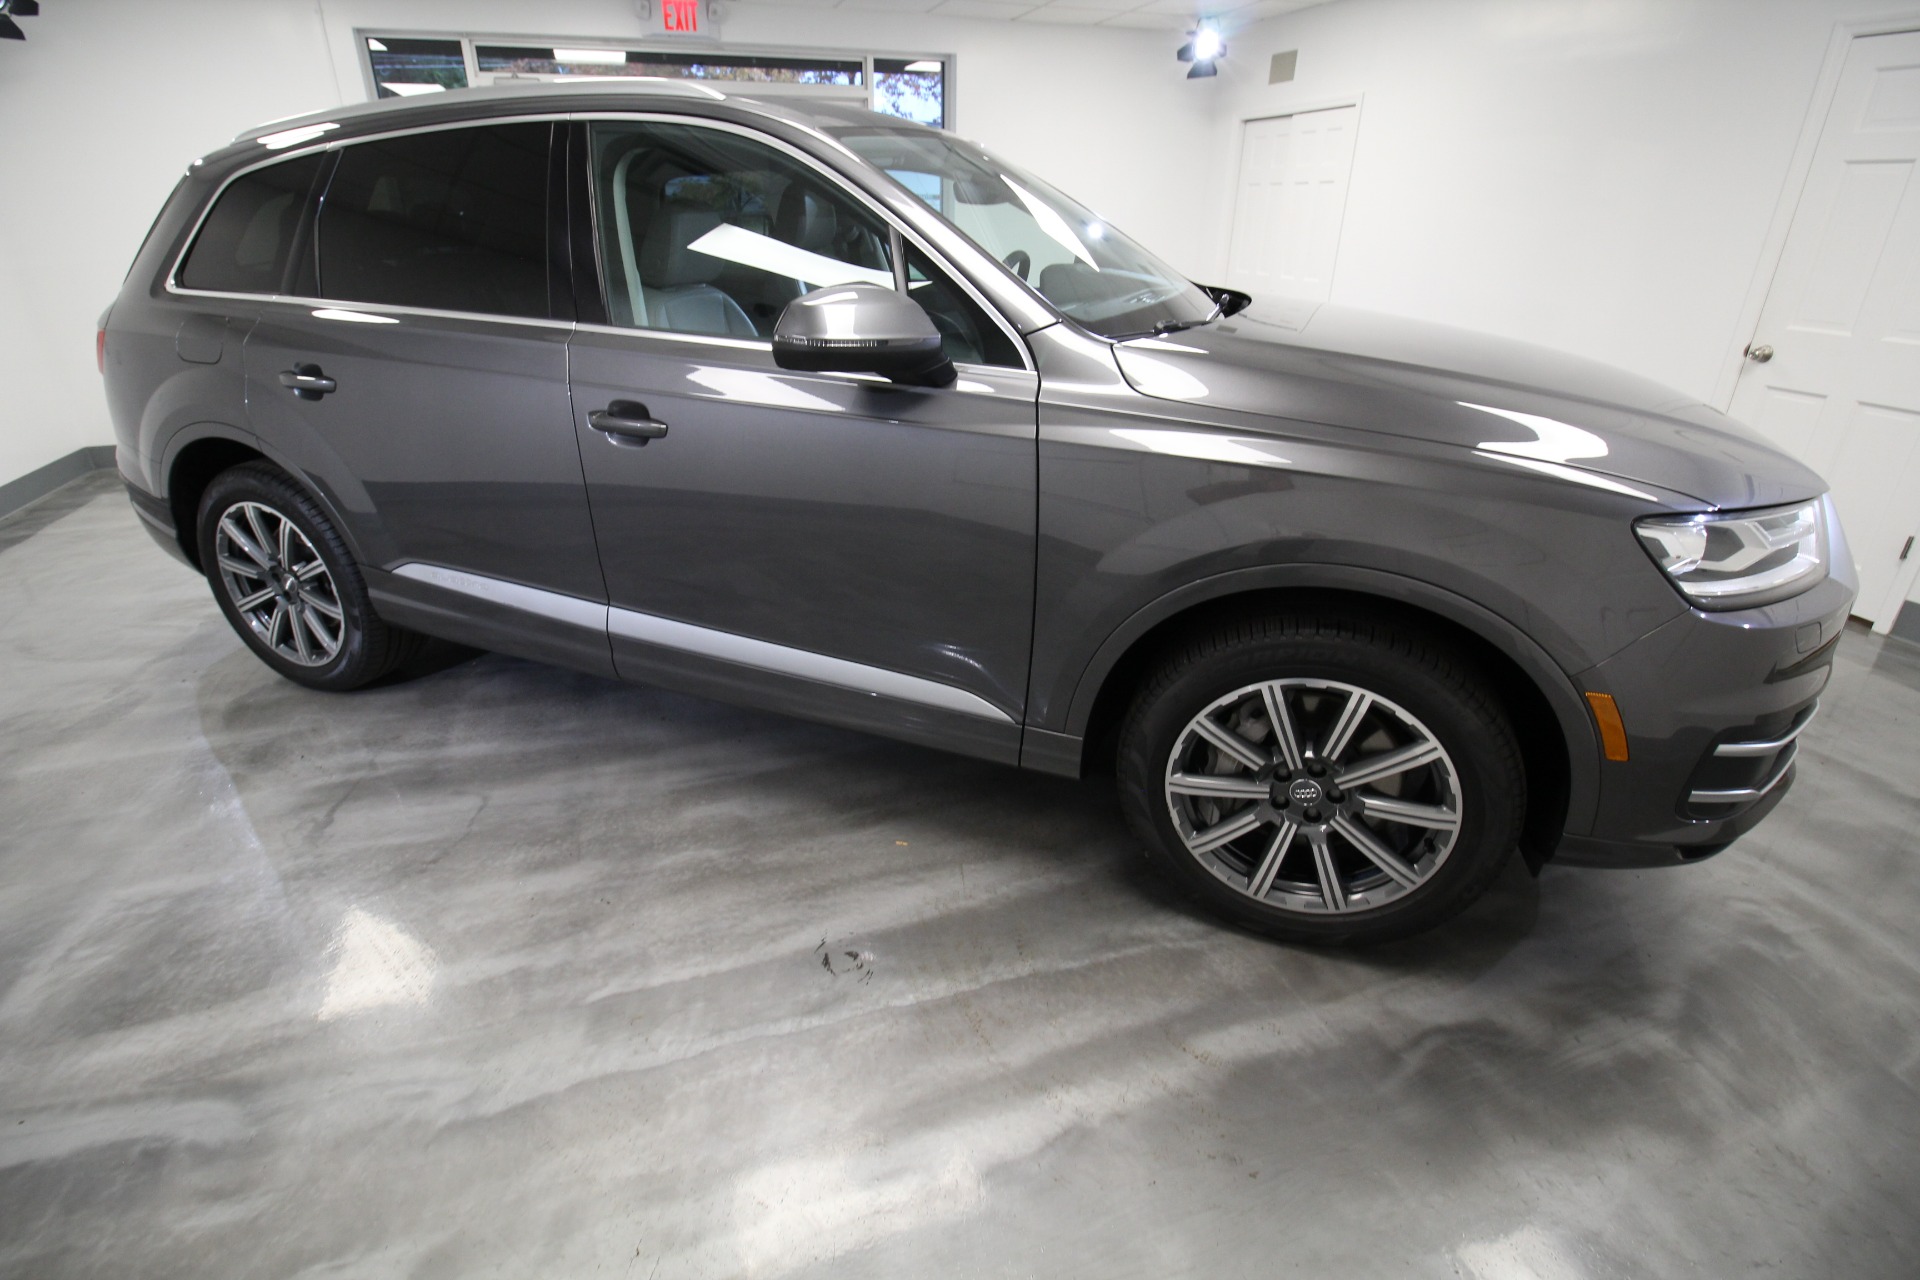 Used 2019 GREY Audi Q7 2.0T Premium quattro SUPERB CONDITION 20in WHEELS CONVENIENCE PKG AND MORE | Albany, NY